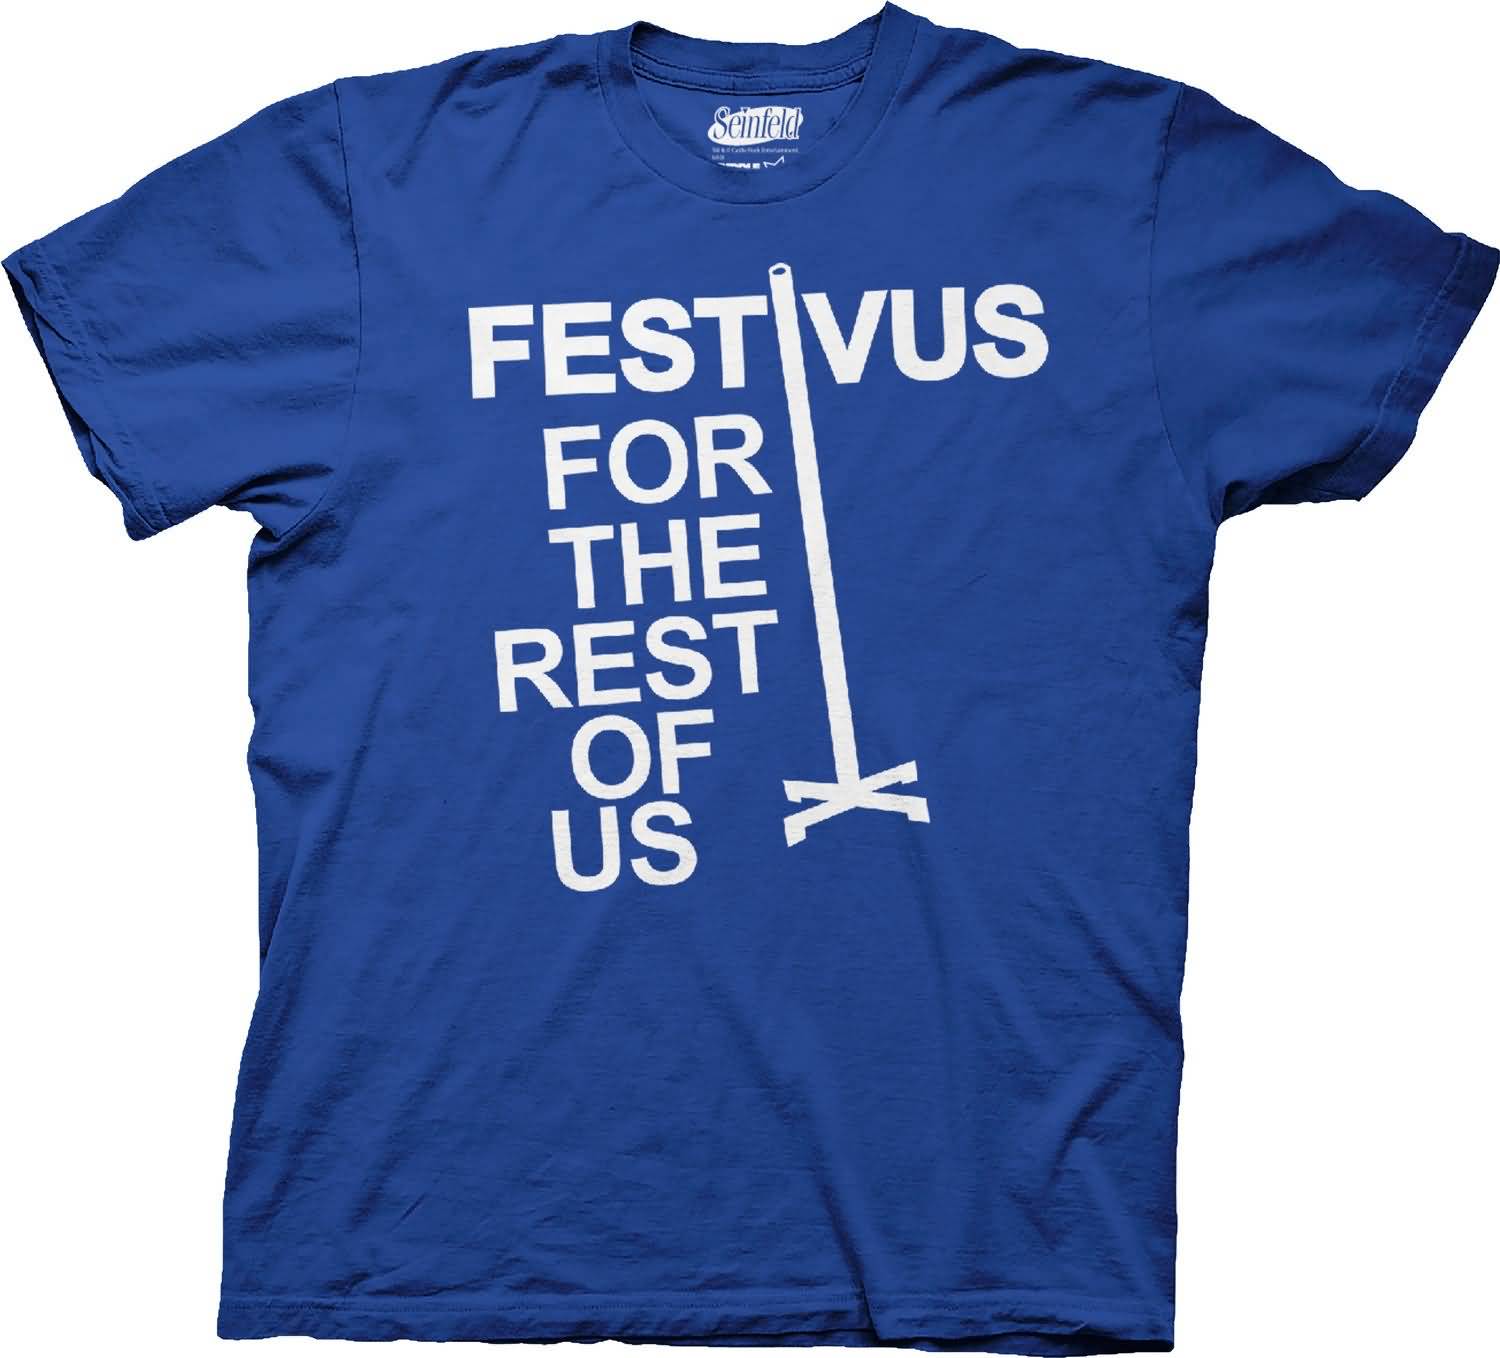 Festivus For The Rest Of Us Tshirt